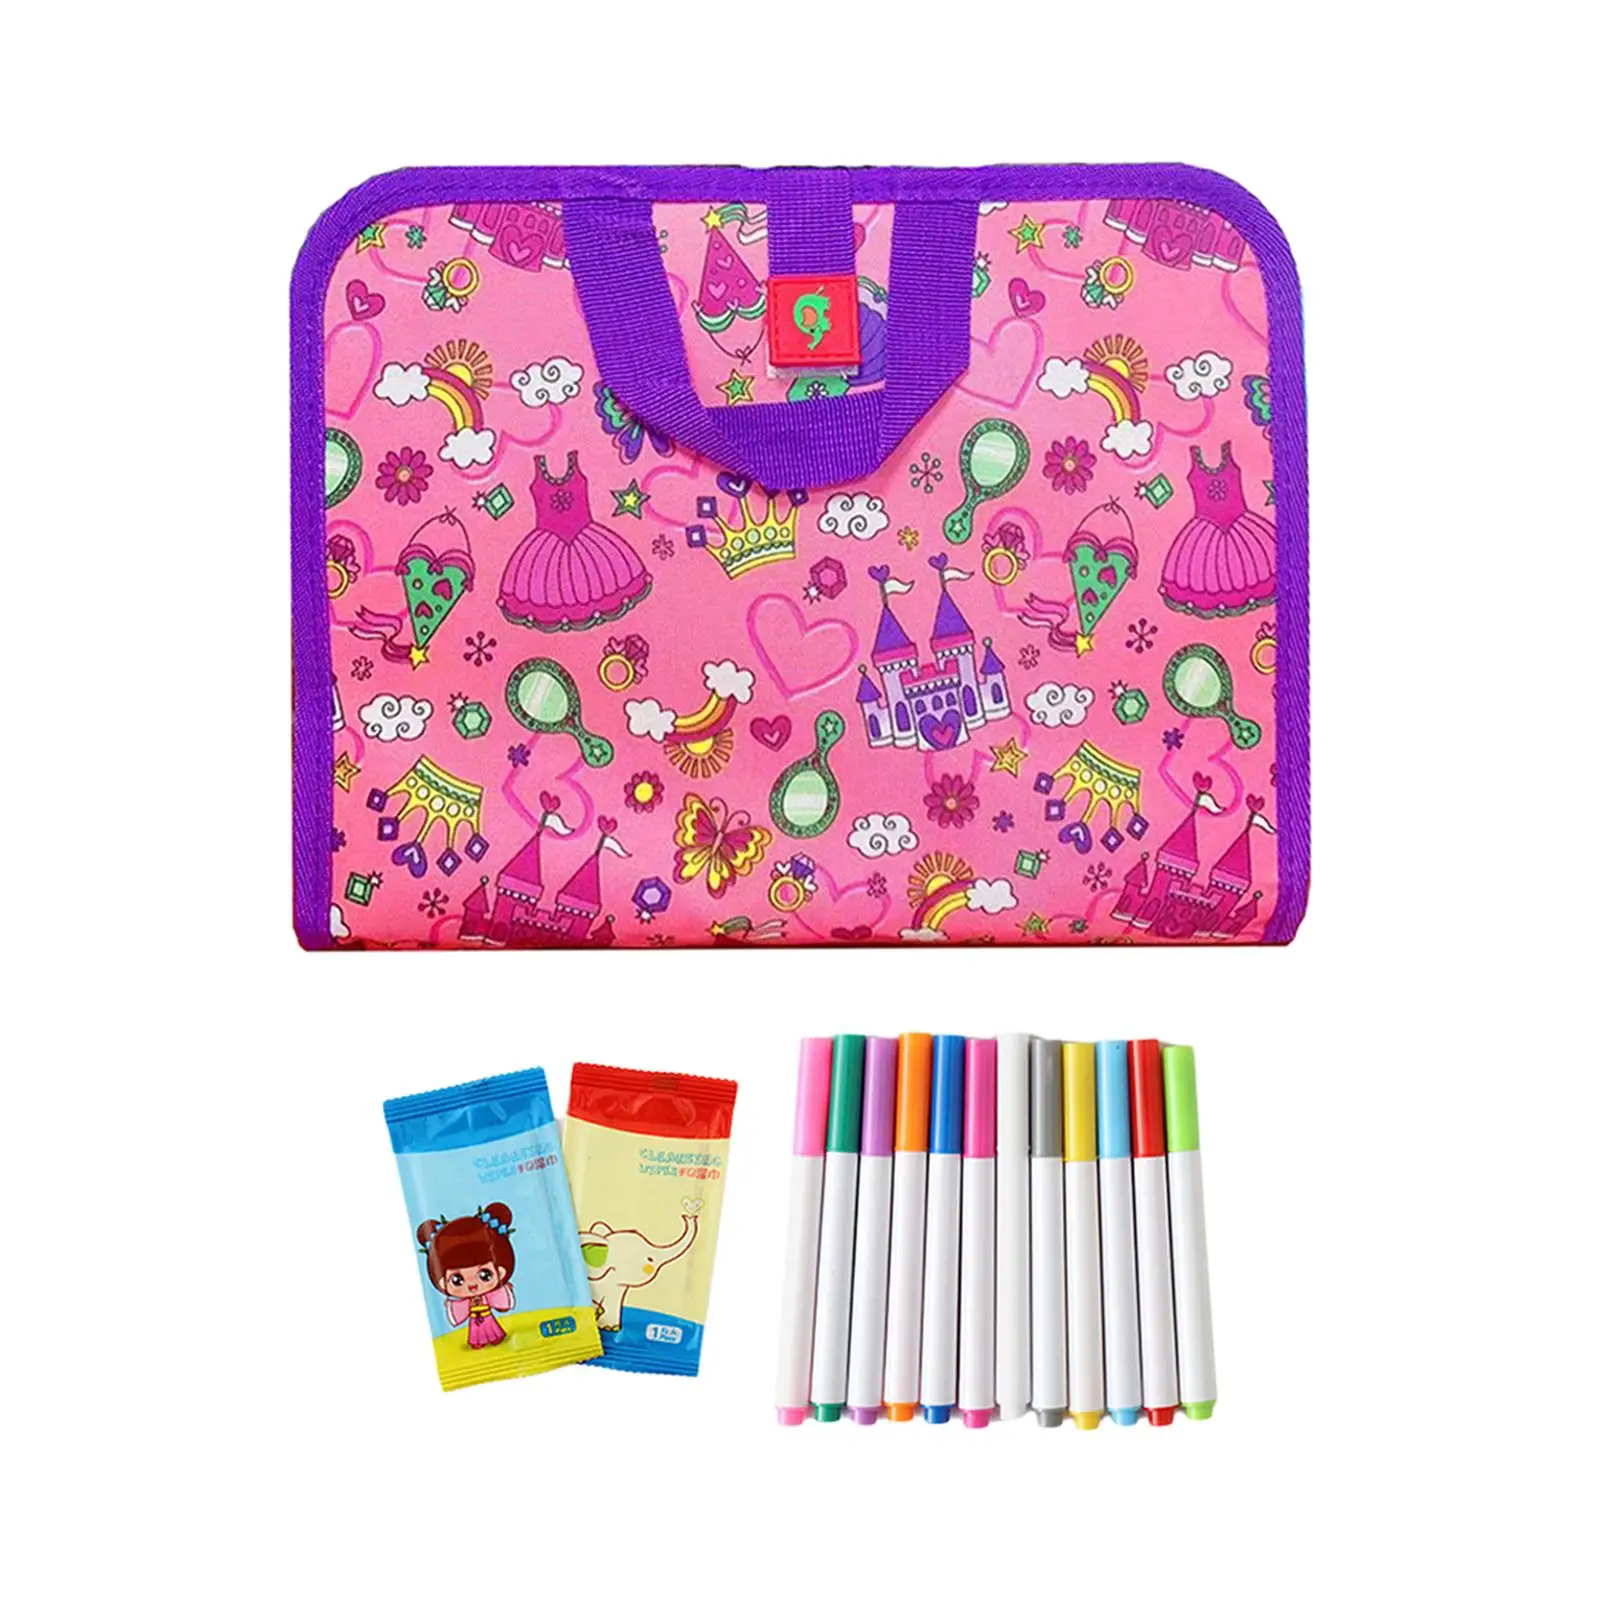 Erasable Book Doodle Set Boys Girls Ages 3+ Toddlers Drawing Pad Holiday Present Writing Painting Set with 12 Watercolor Pens